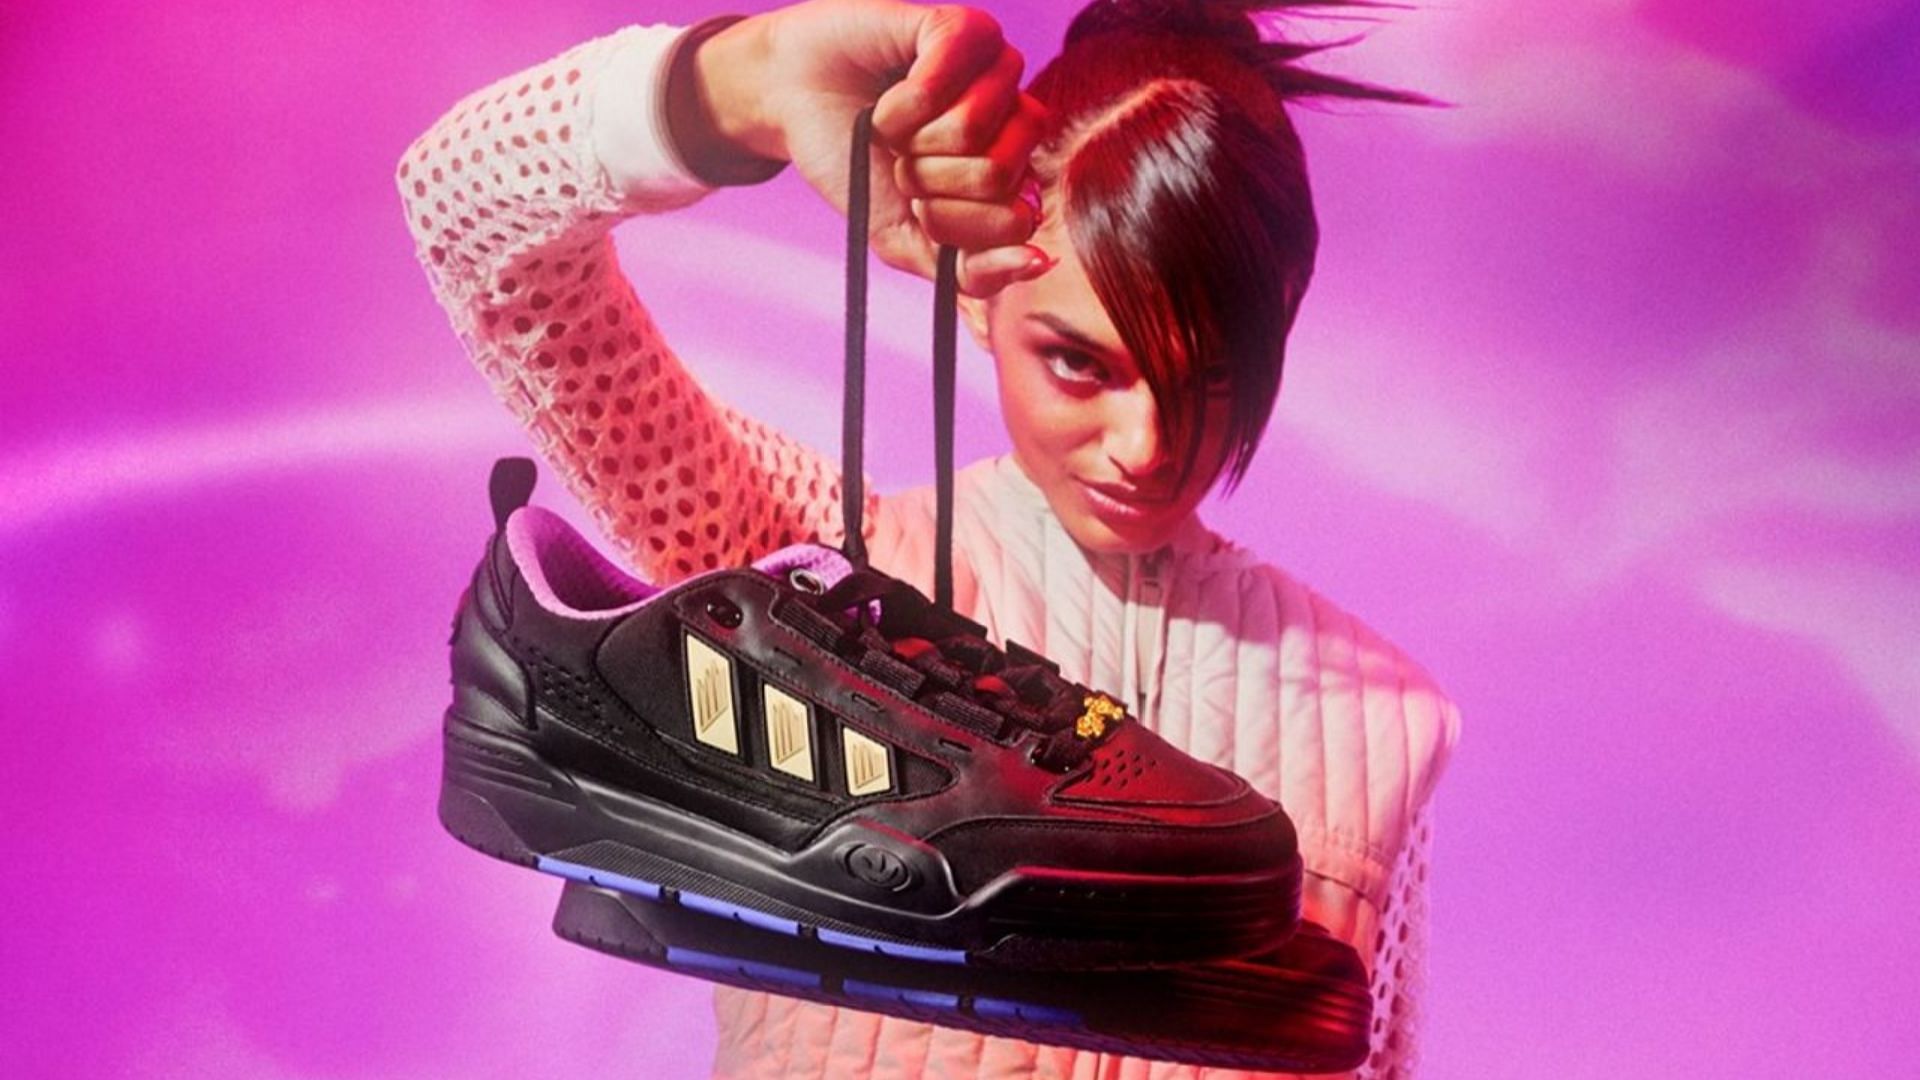 x Originals buy, and date, Where more price, explored ADI2000 release sneakers: to Yu-Gi-Oh Adidas